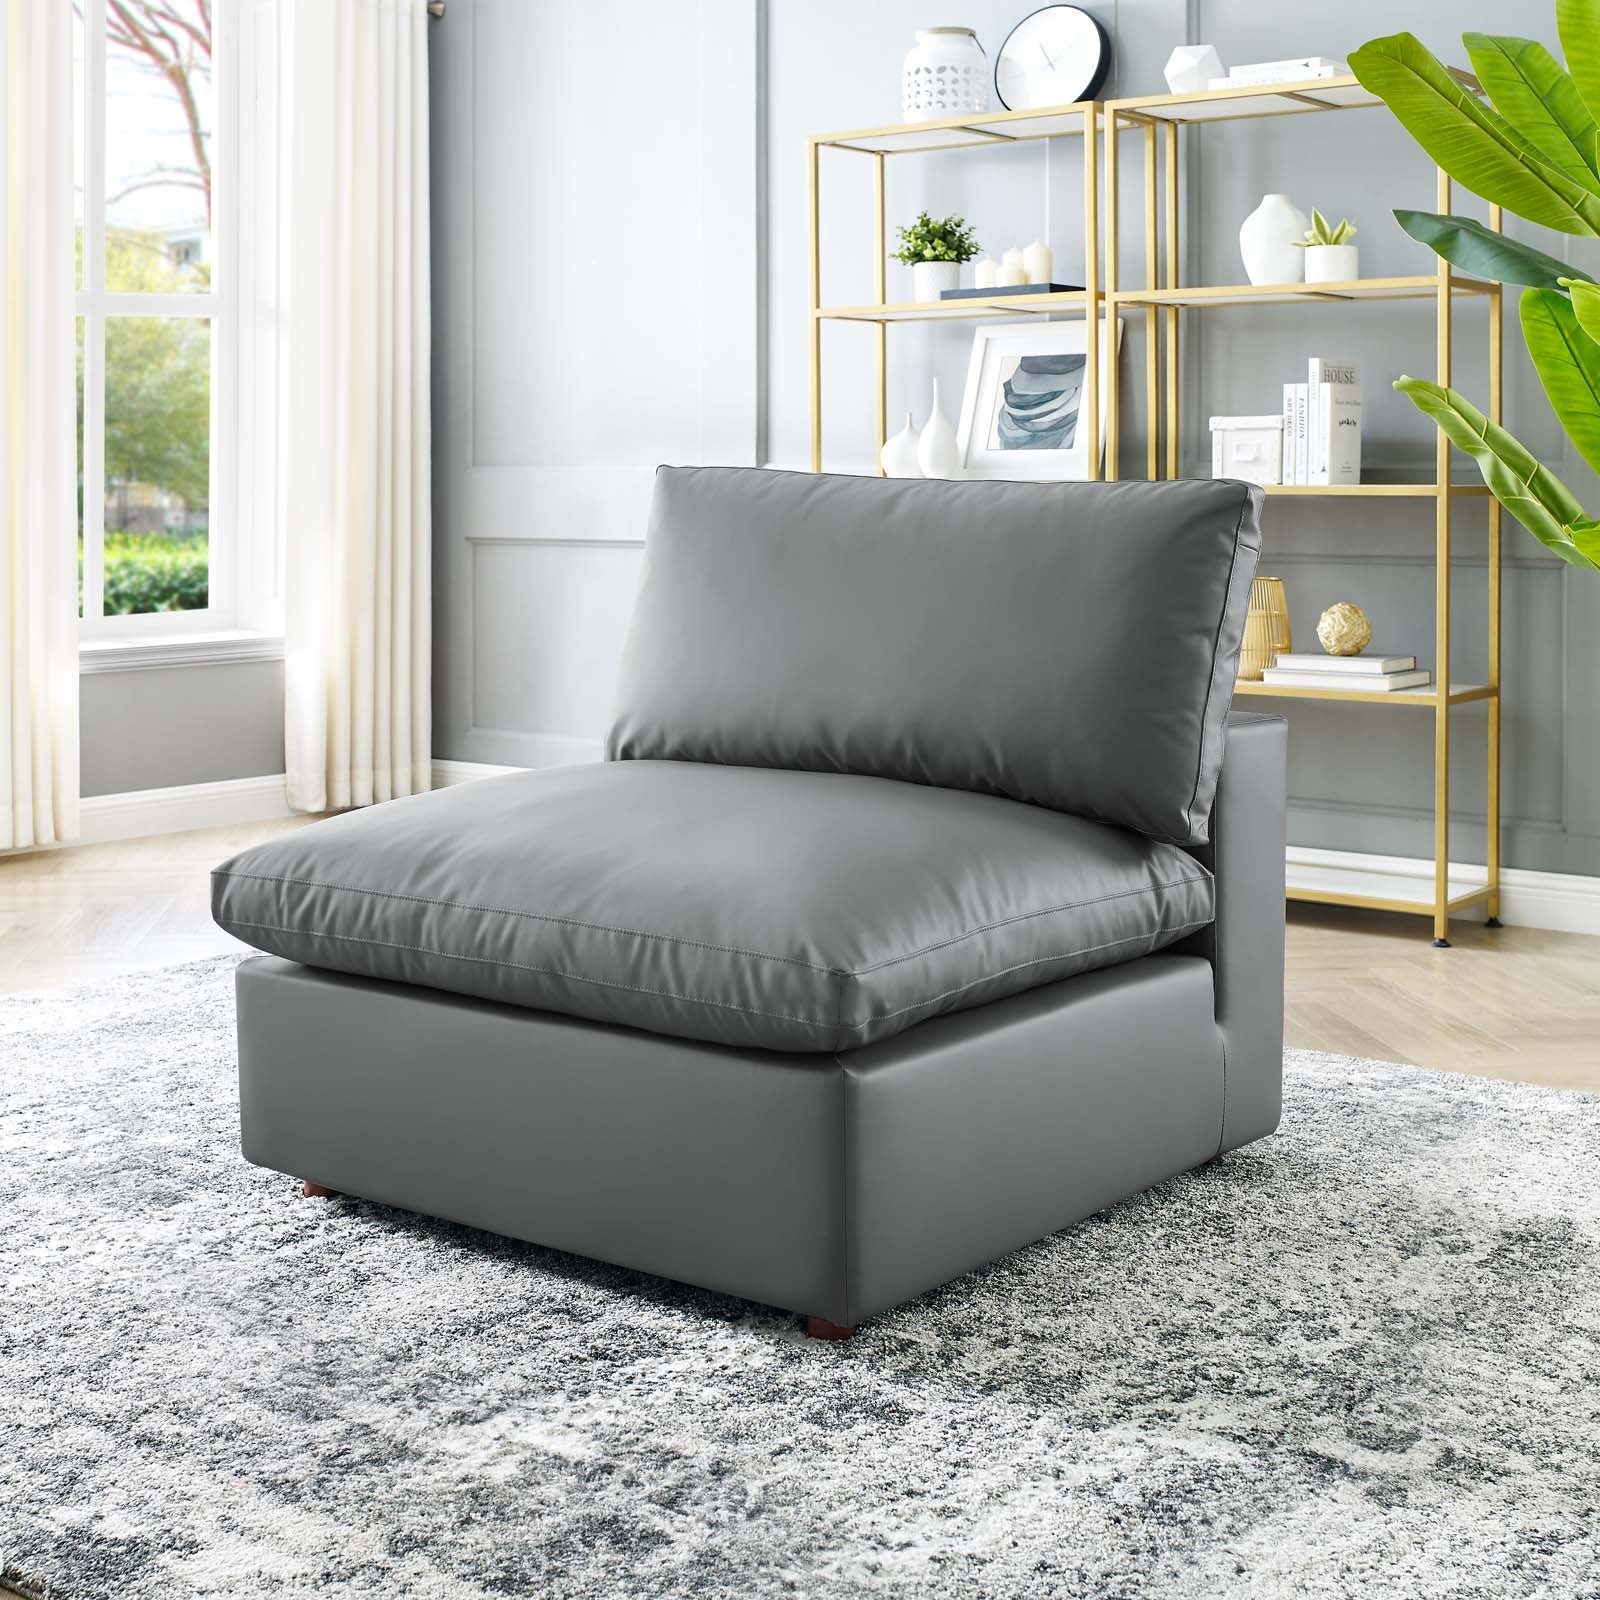 Modway Accent Chairs - Commix Down Filled Overstuffed Vegan Leather Armless Chair Gray